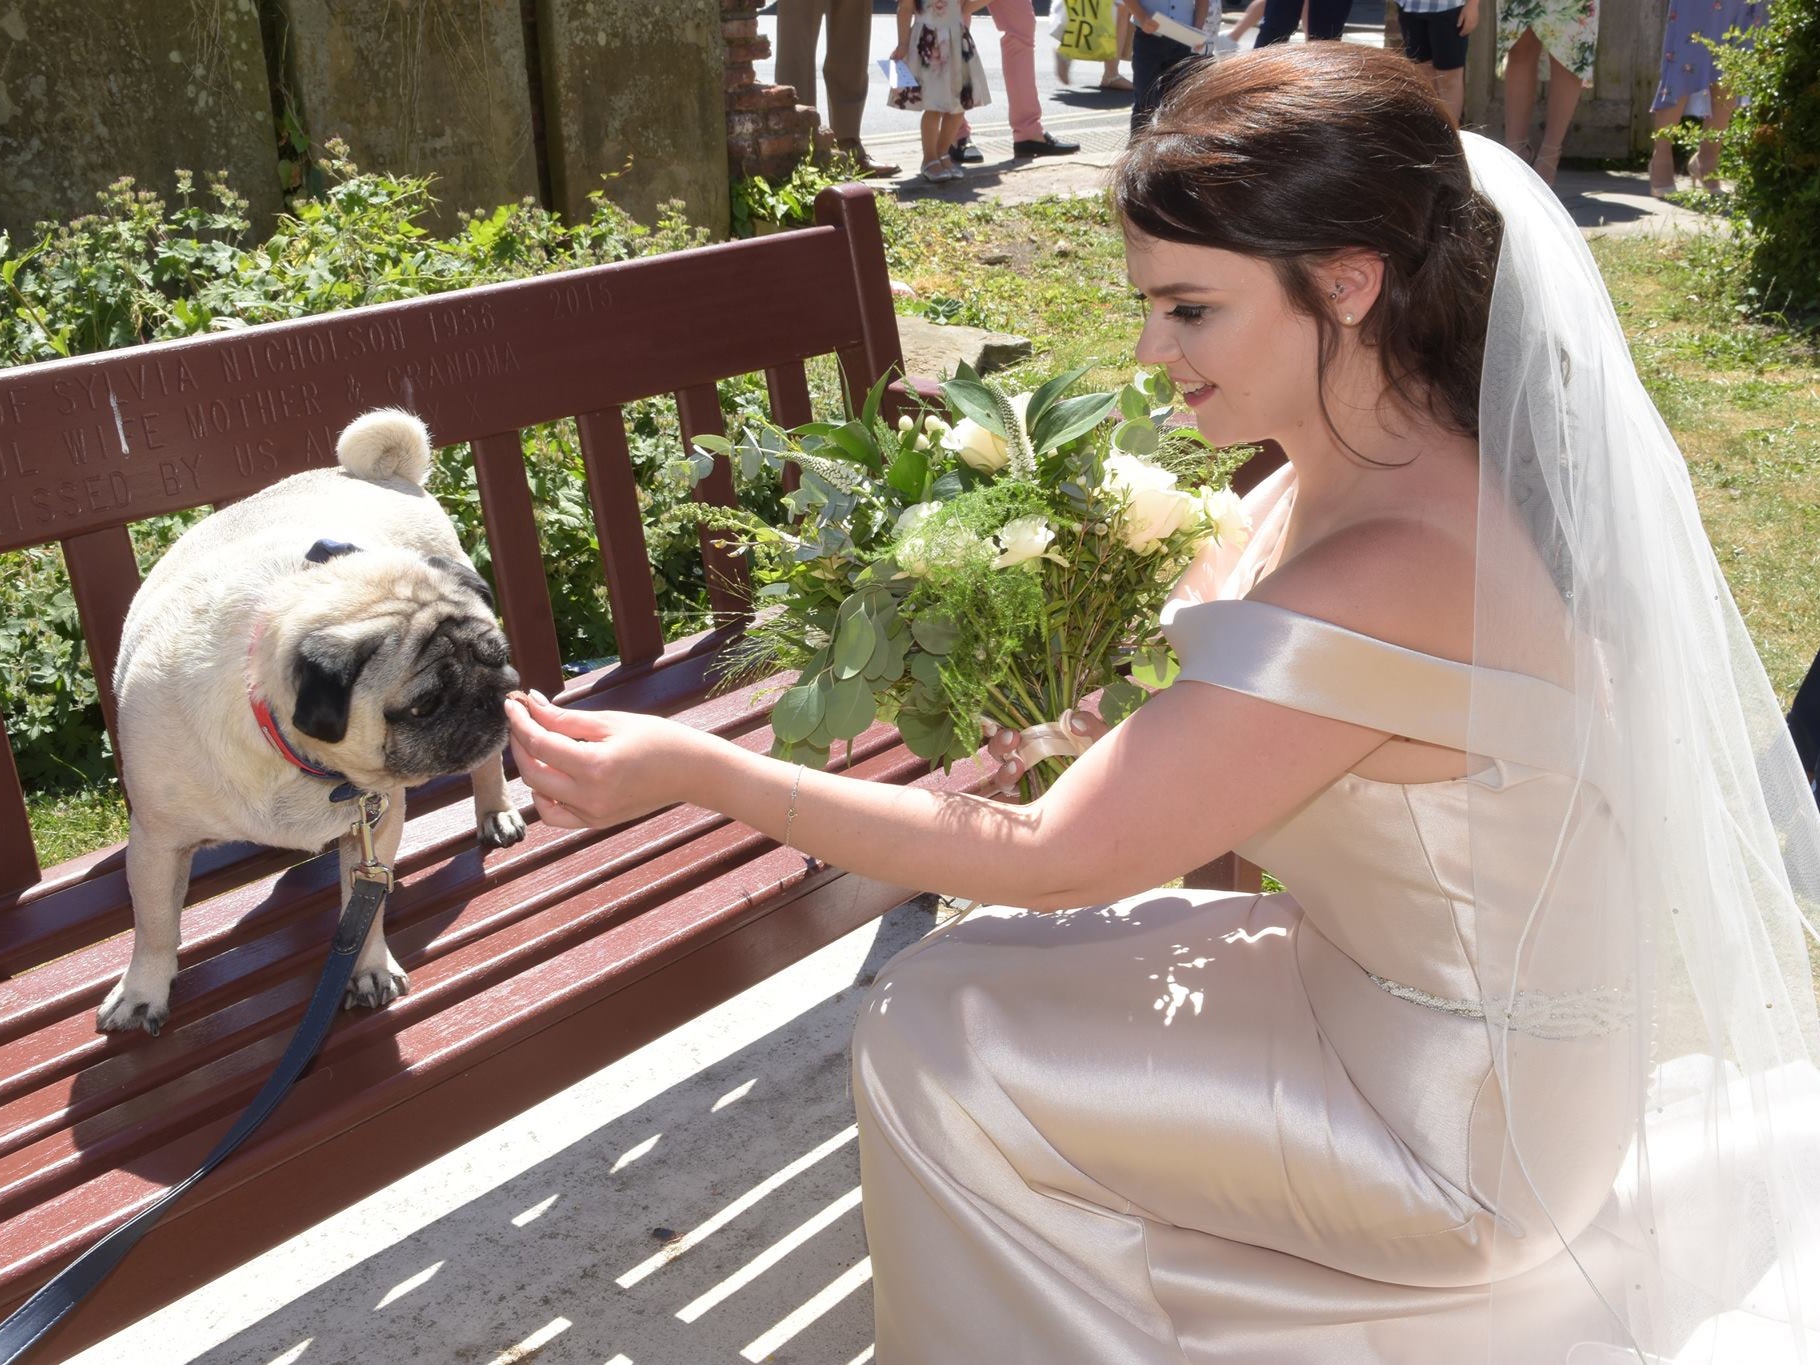 Unsurprisingly, Rupert had a starring role at my wedding